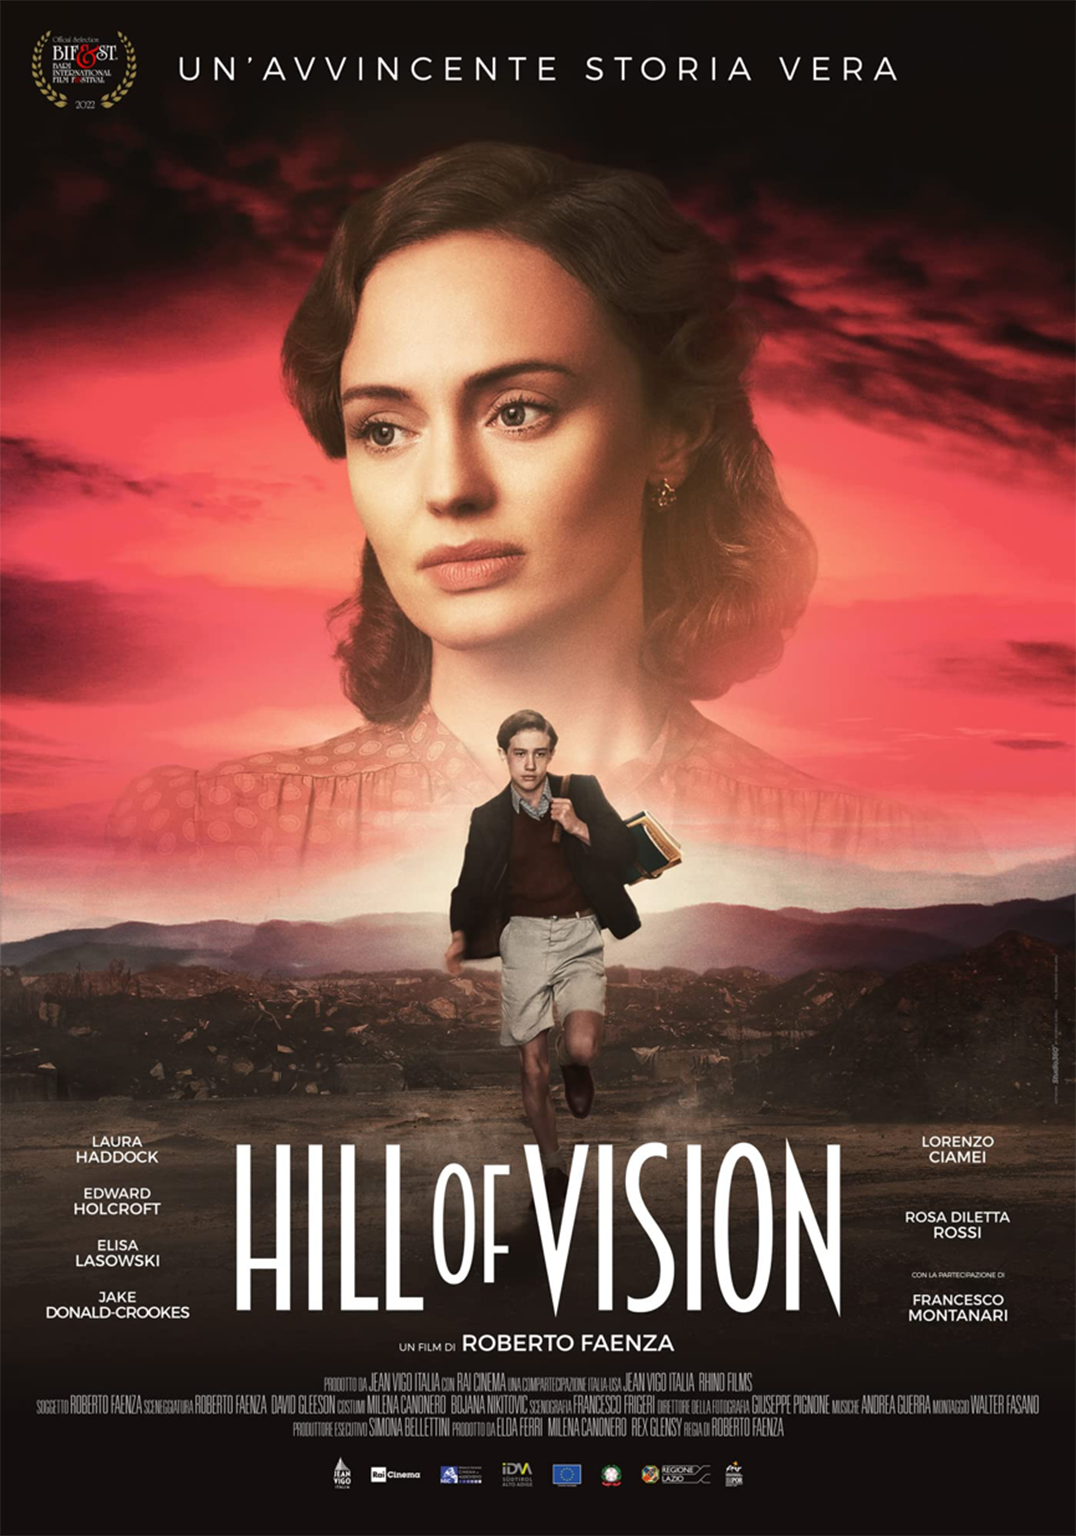 HILL OF VISION